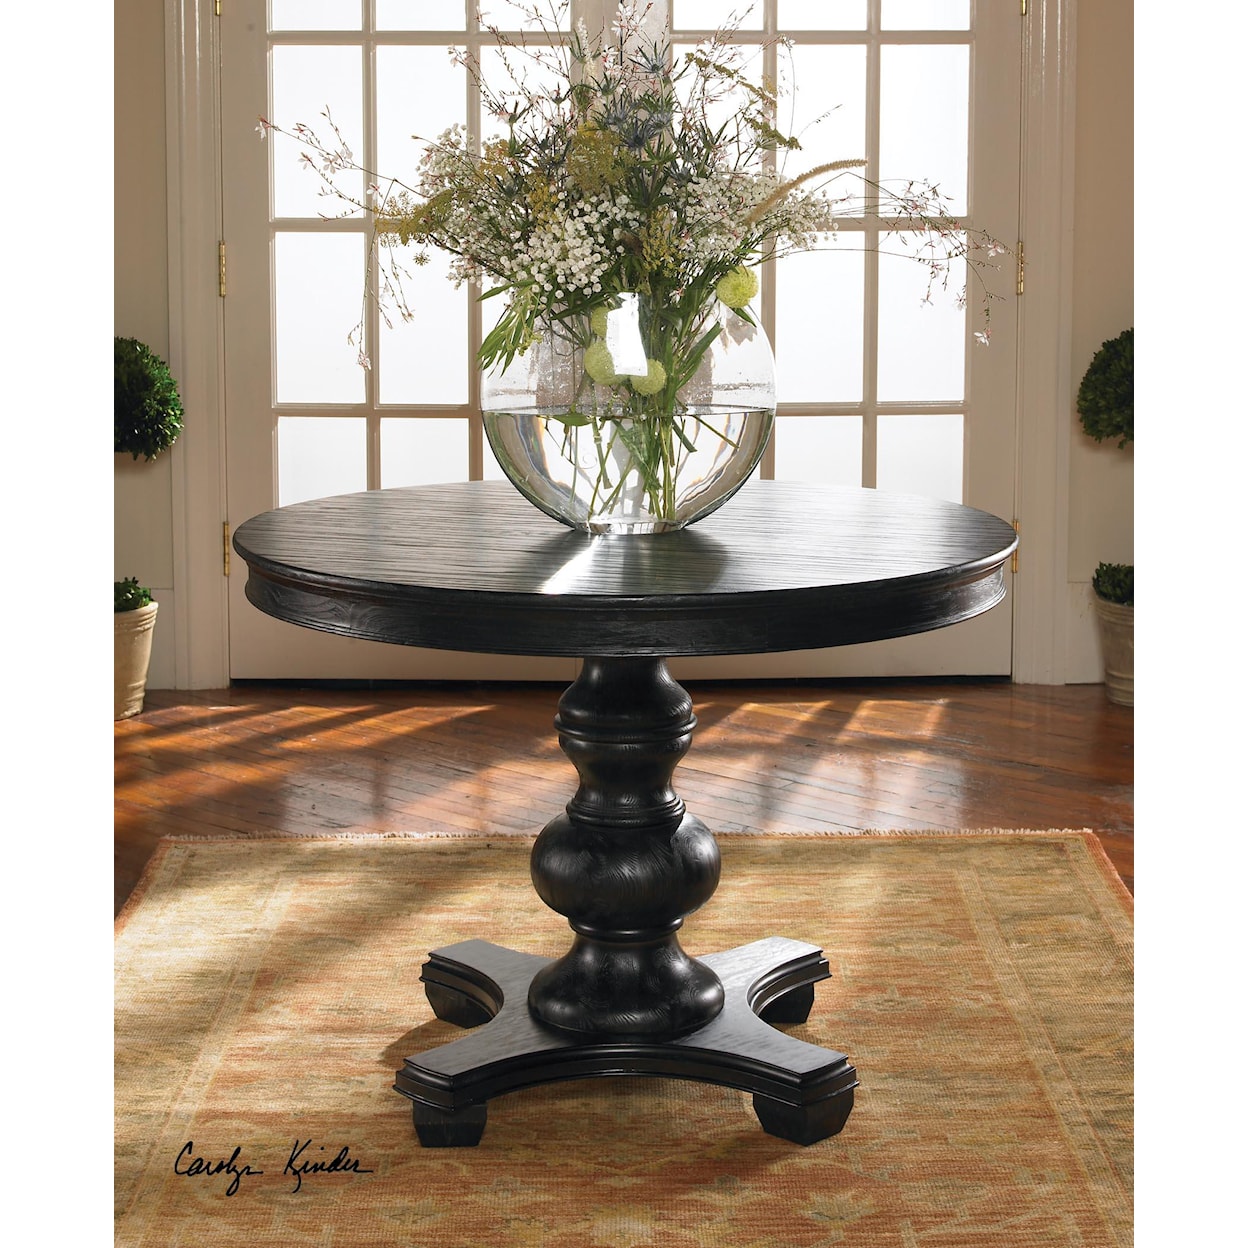 Uttermost Accent Furniture - Occasional Tables Brynmore Wood Grain Round Table